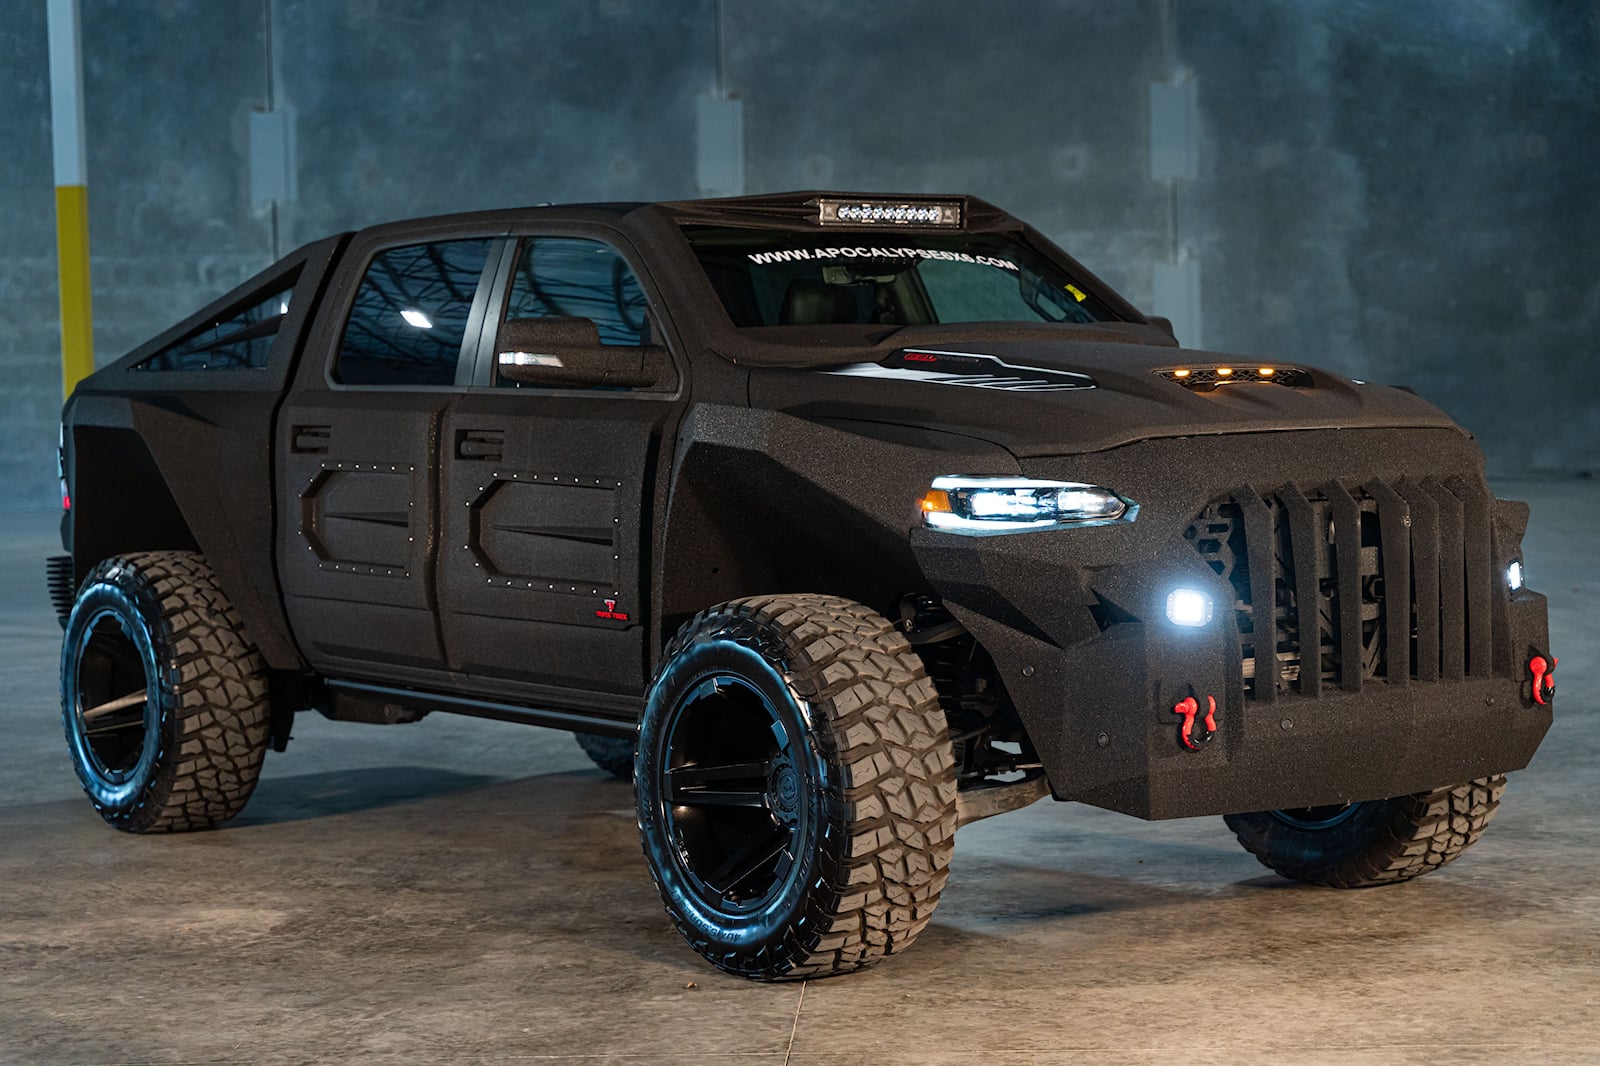 Apocalypse Super Truck Is A Ram-Based 4x4 With 850 HP And